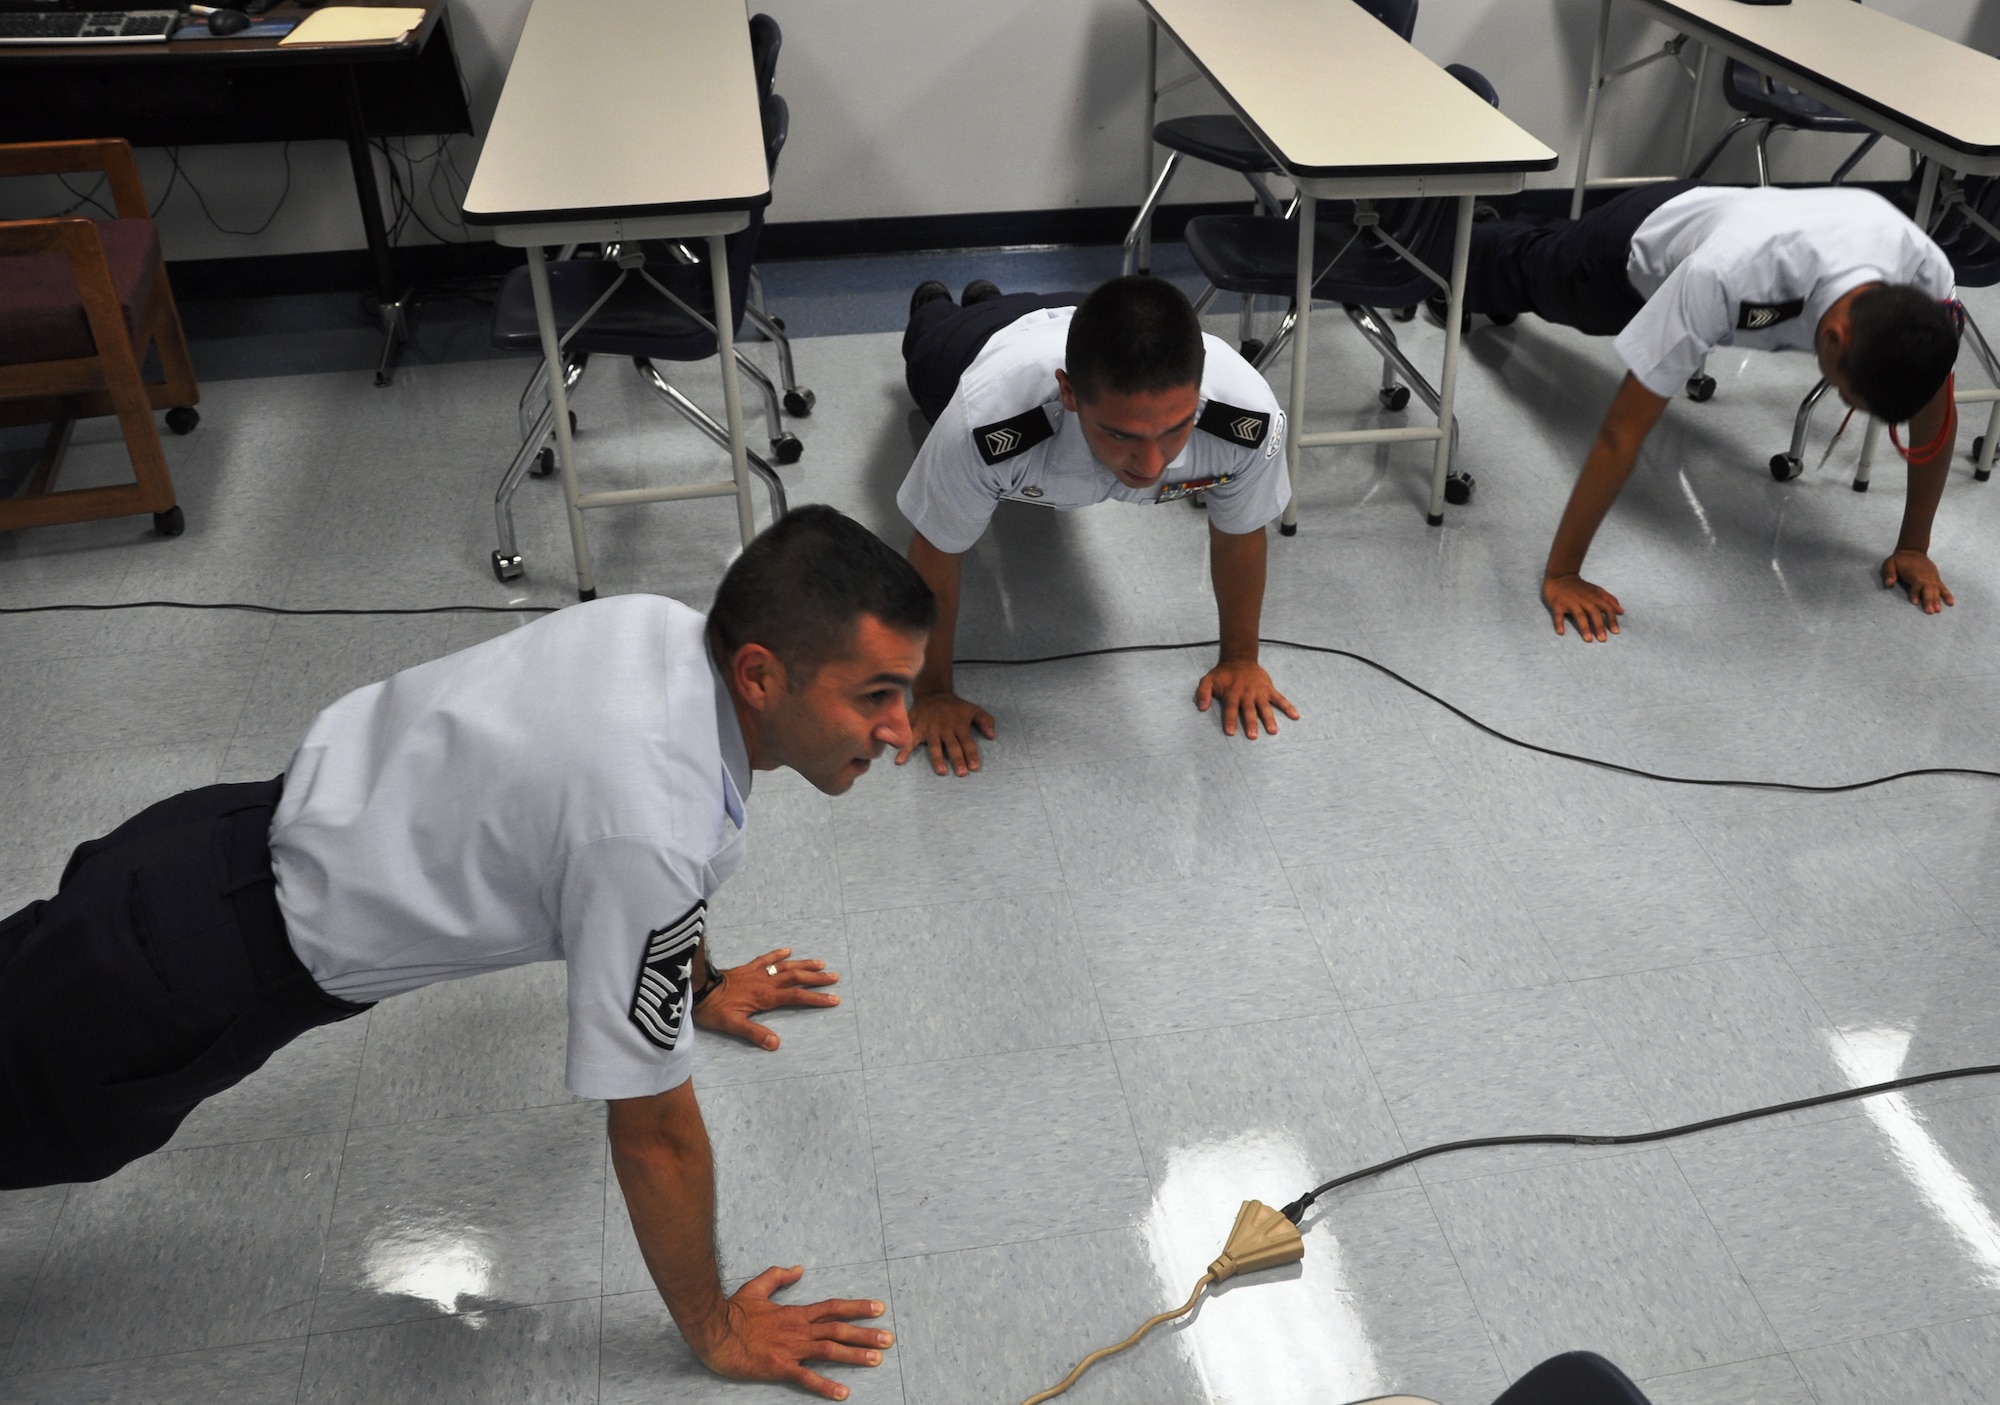 LAUGHLIN AIR FORCE BASE, Texas – Command Chief Master Sgt. Ruben Gonzalez, Air Force Recruiting Service command chief, leads the Del Rio chapter of Junior Reserve Officer Training Corp cadets in a set of pushups Aug. 19. Chief Gonzalez, who is from Eagle Pass and was recruited into the Air Force out of Del Rio in 1985, chose to begin his world-wide tour of AF recruiting stations with Del Rio. (U.S. Air Force photo by Airman 1st Class Blake Mize)